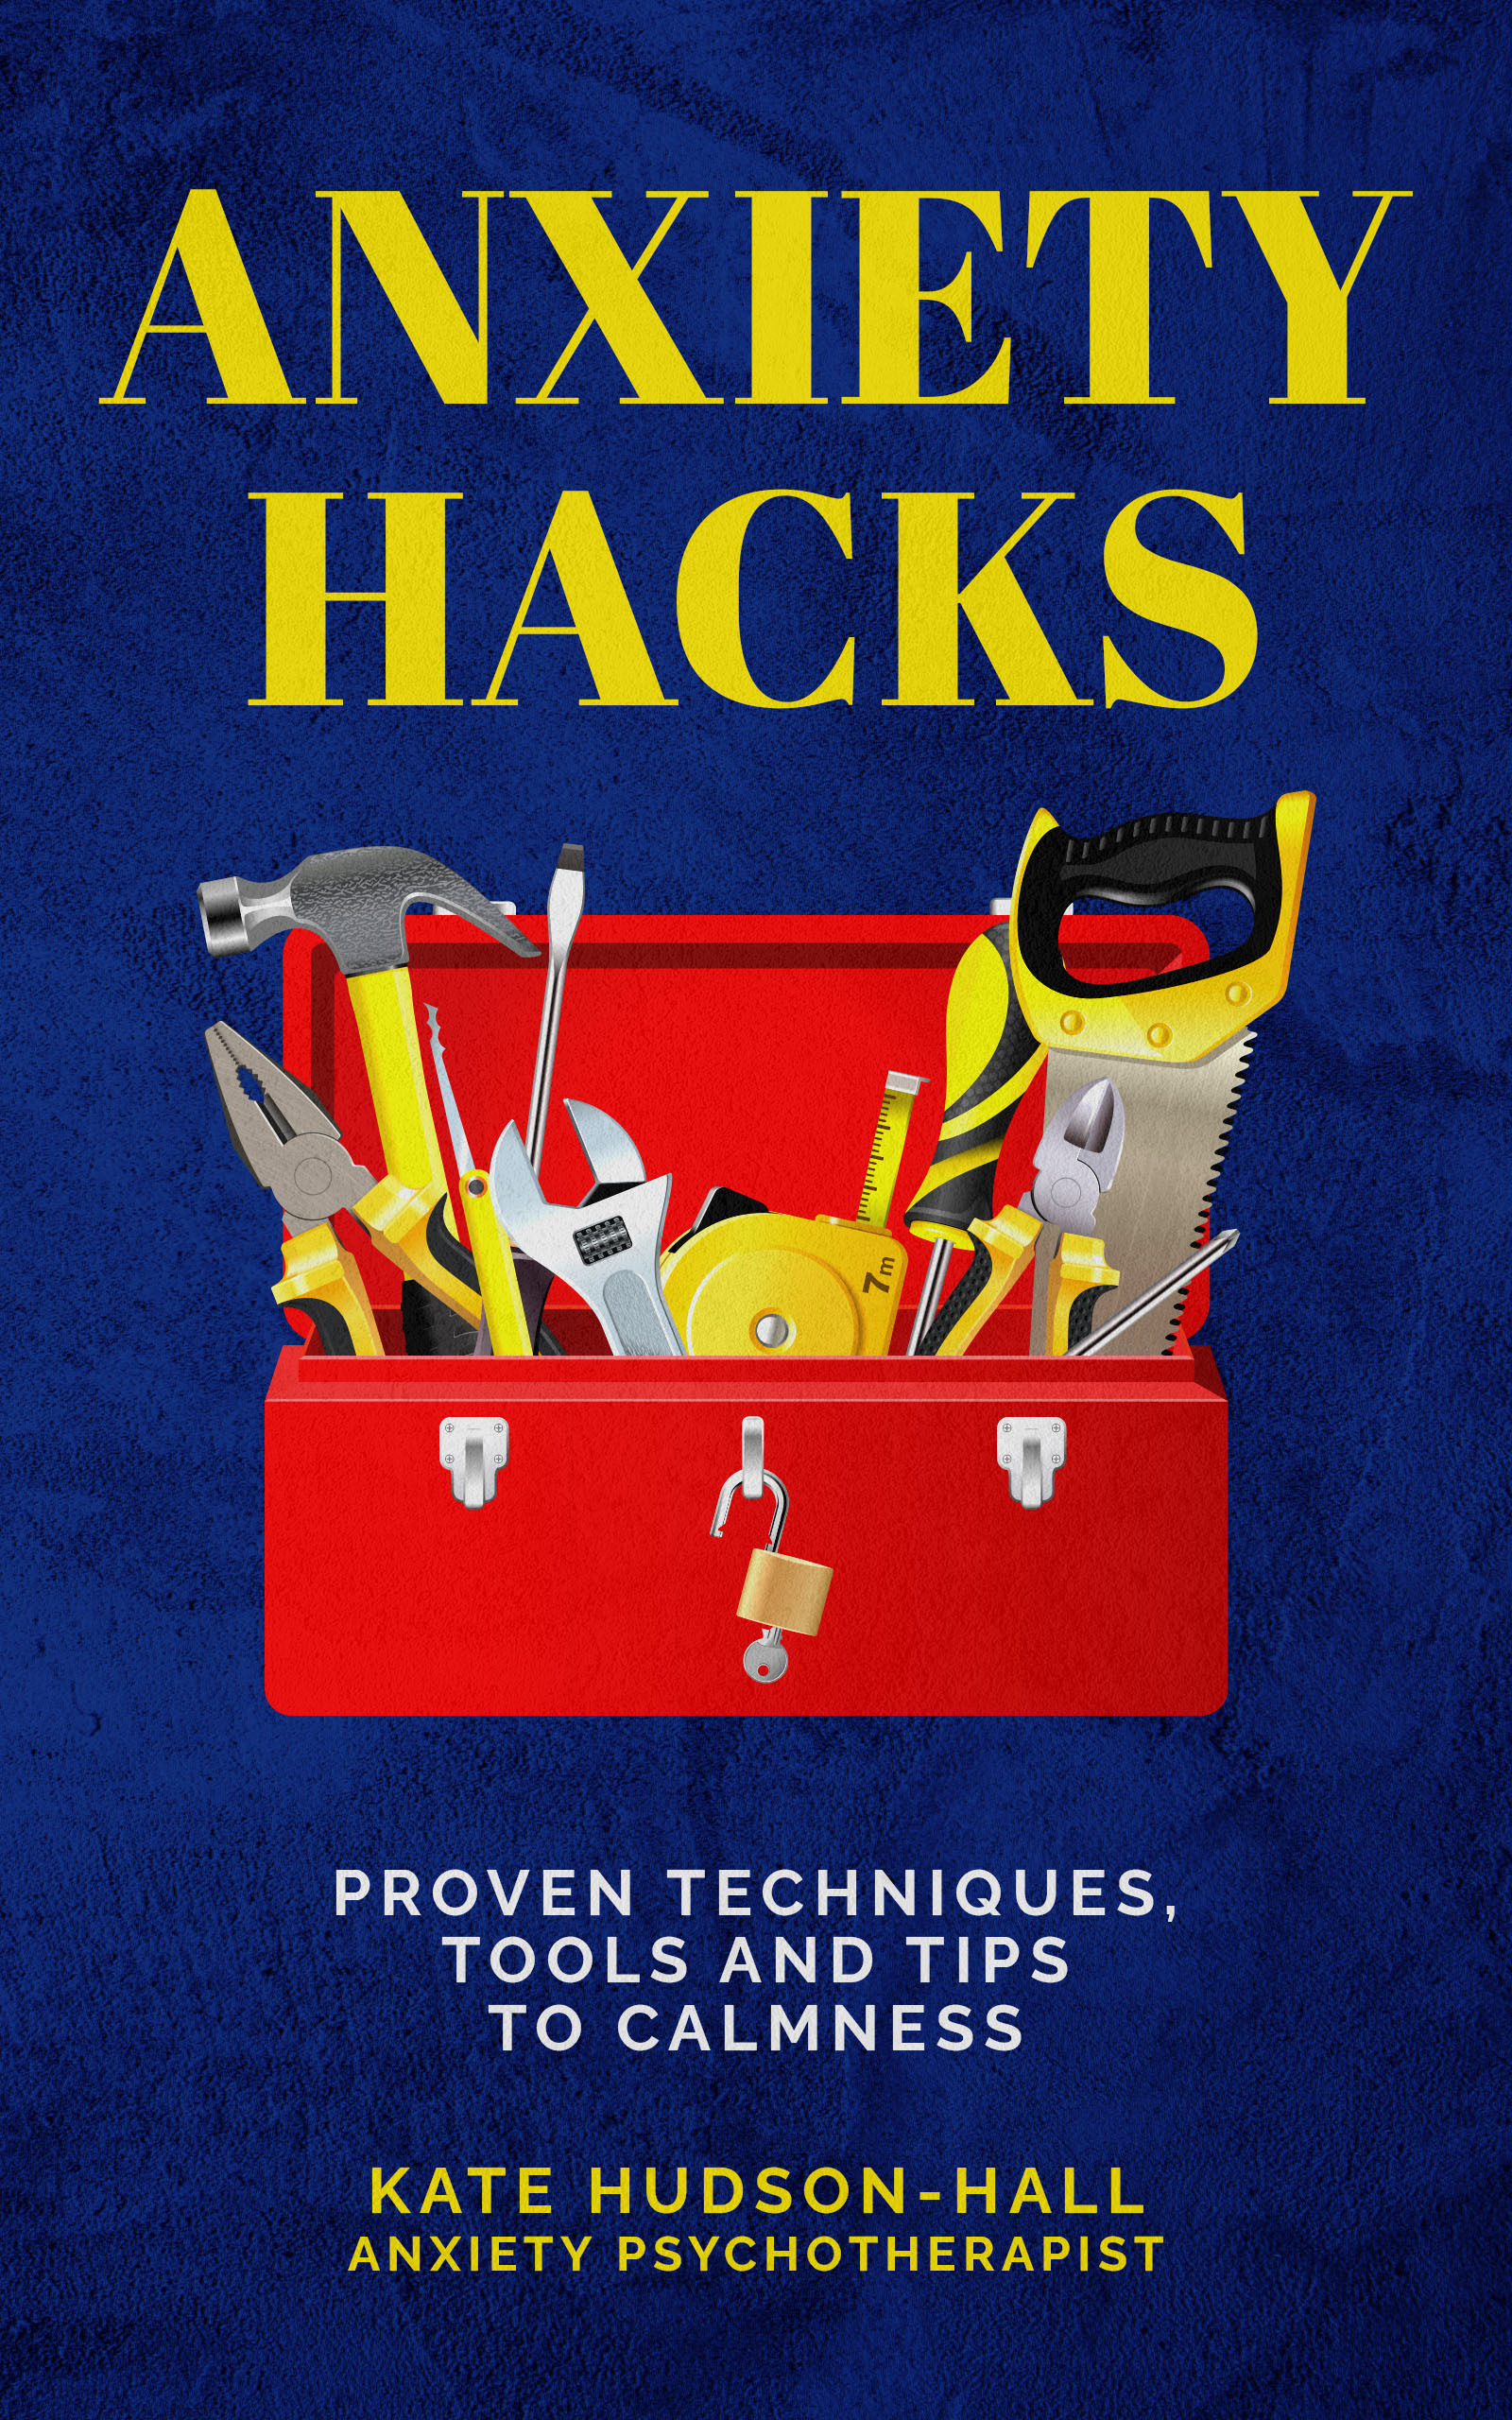 FREE: Anxiety Hacks by Kate Hudson-Hall